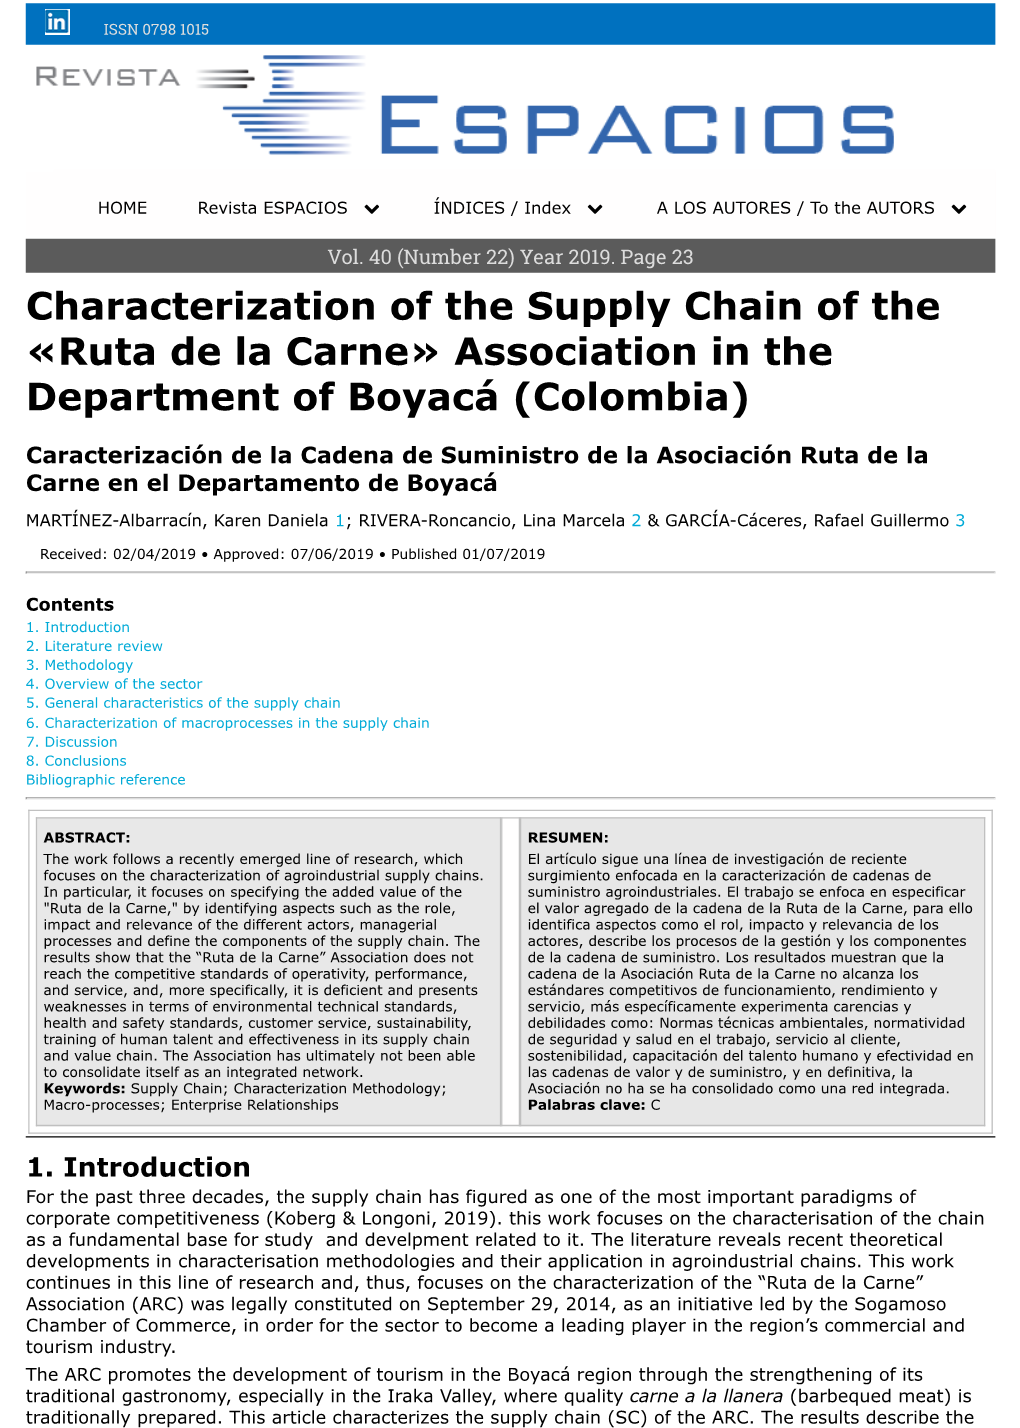 Characterization of the Supply Chain of the «Ruta De La Carne» Association in the Department of Boyacá (Colombia)